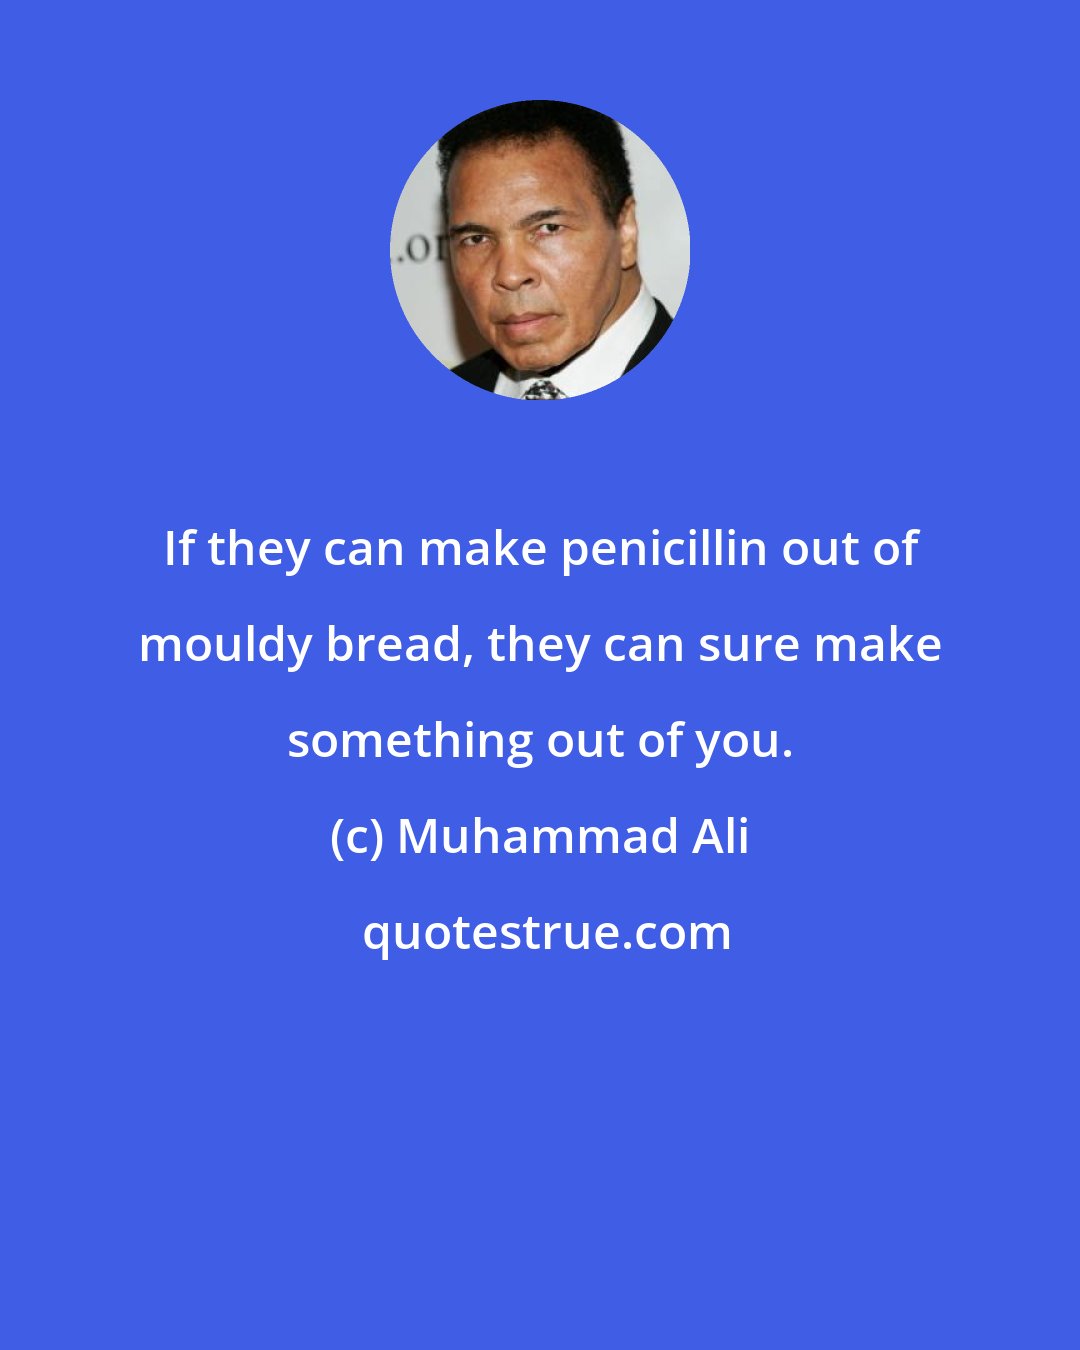 Muhammad Ali: If they can make penicillin out of mouldy bread, they can sure make something out of you.